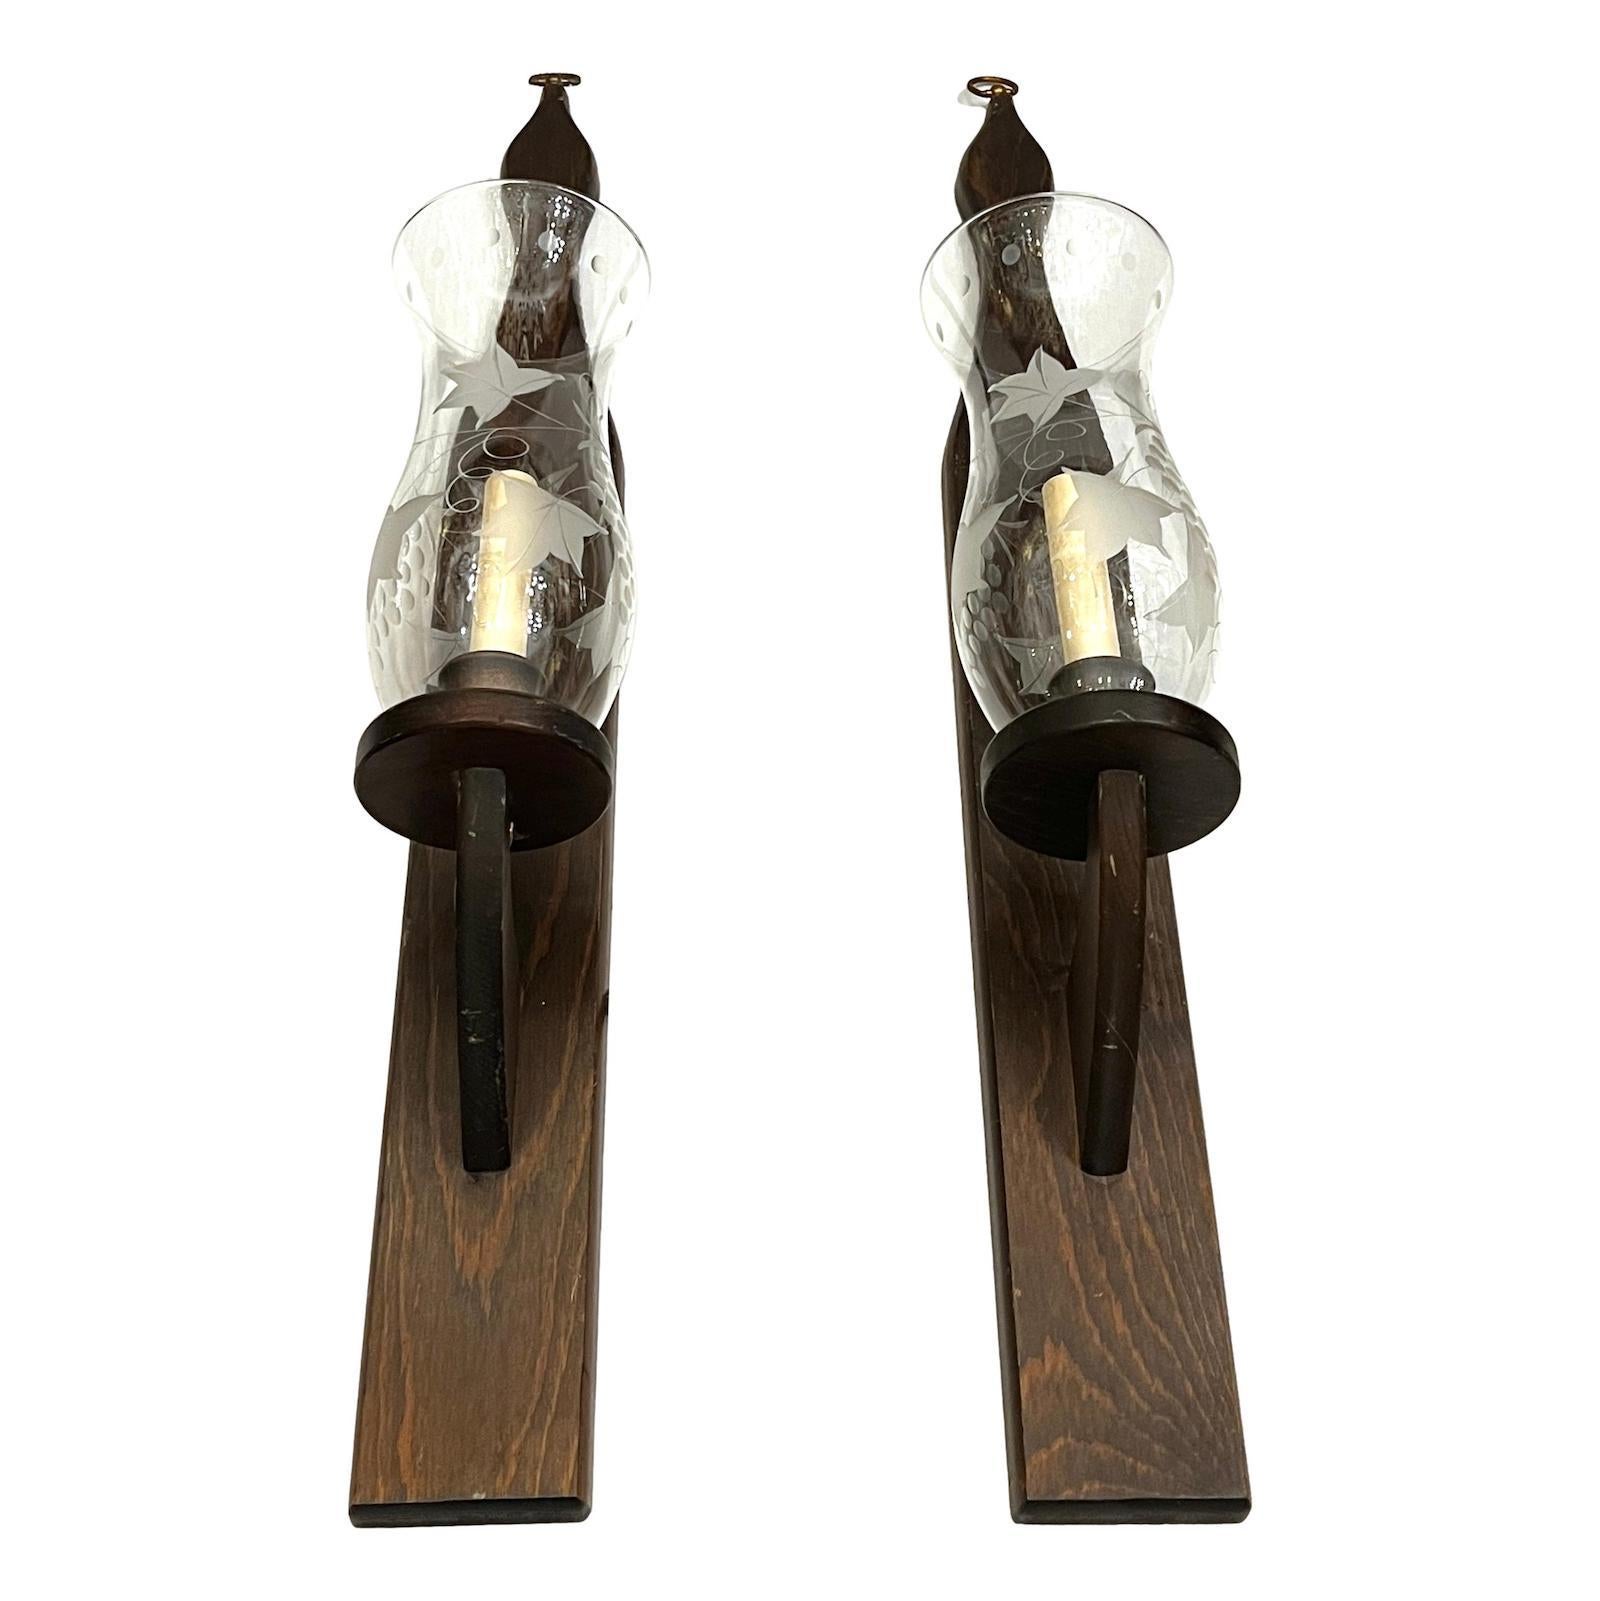 Pair of Italian circa 1950s single-light wood sconces with etched glass hurricanes.

Measurements:
Height: 31